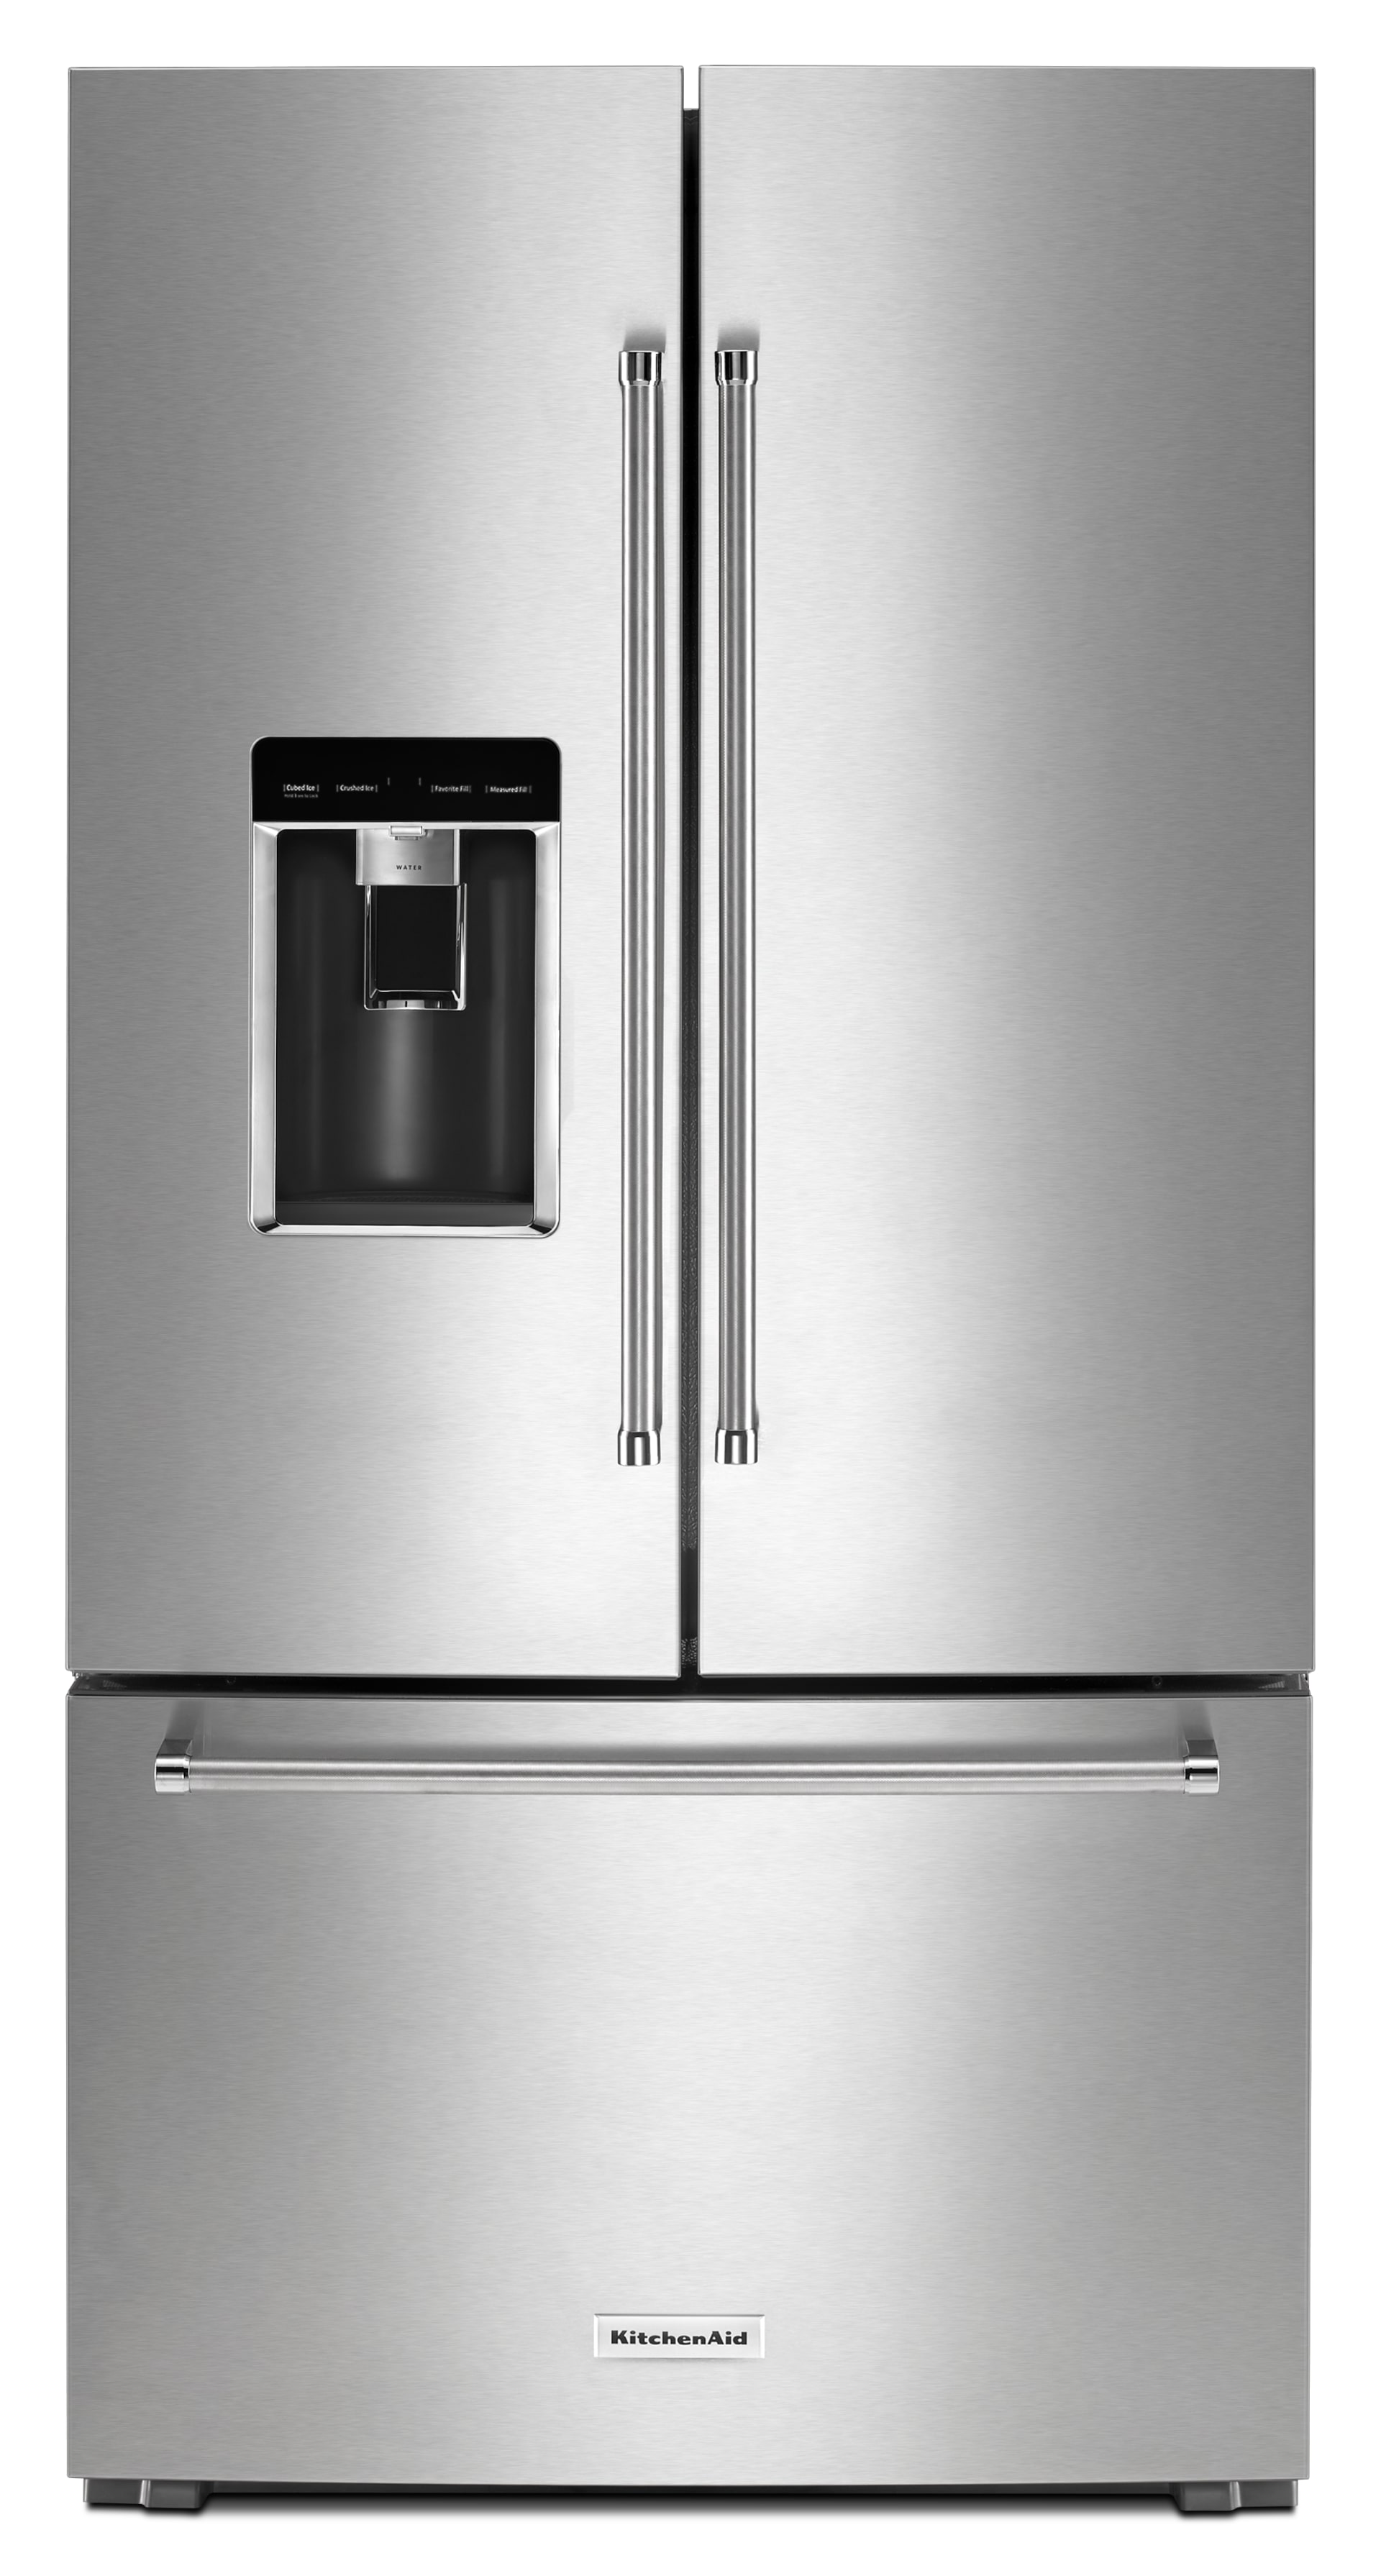 17++ Kitchenaid counter depth side by side refrigerator manual ideas in 2021 